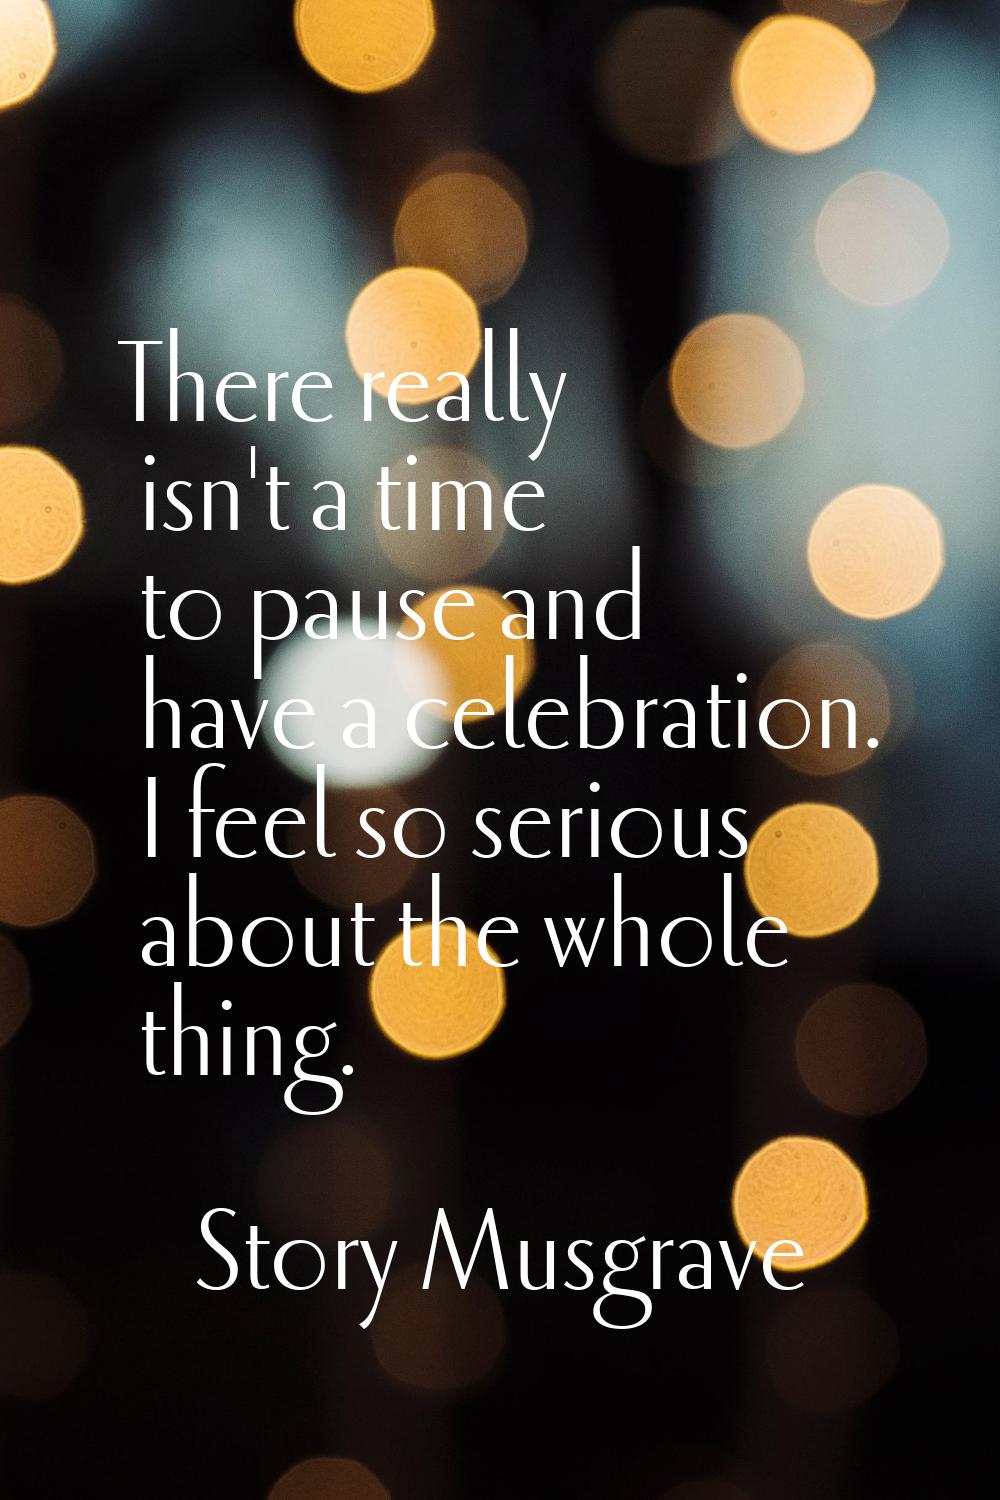 There really isn't a time to pause and have a celebration. I feel so serious about the whole thing.